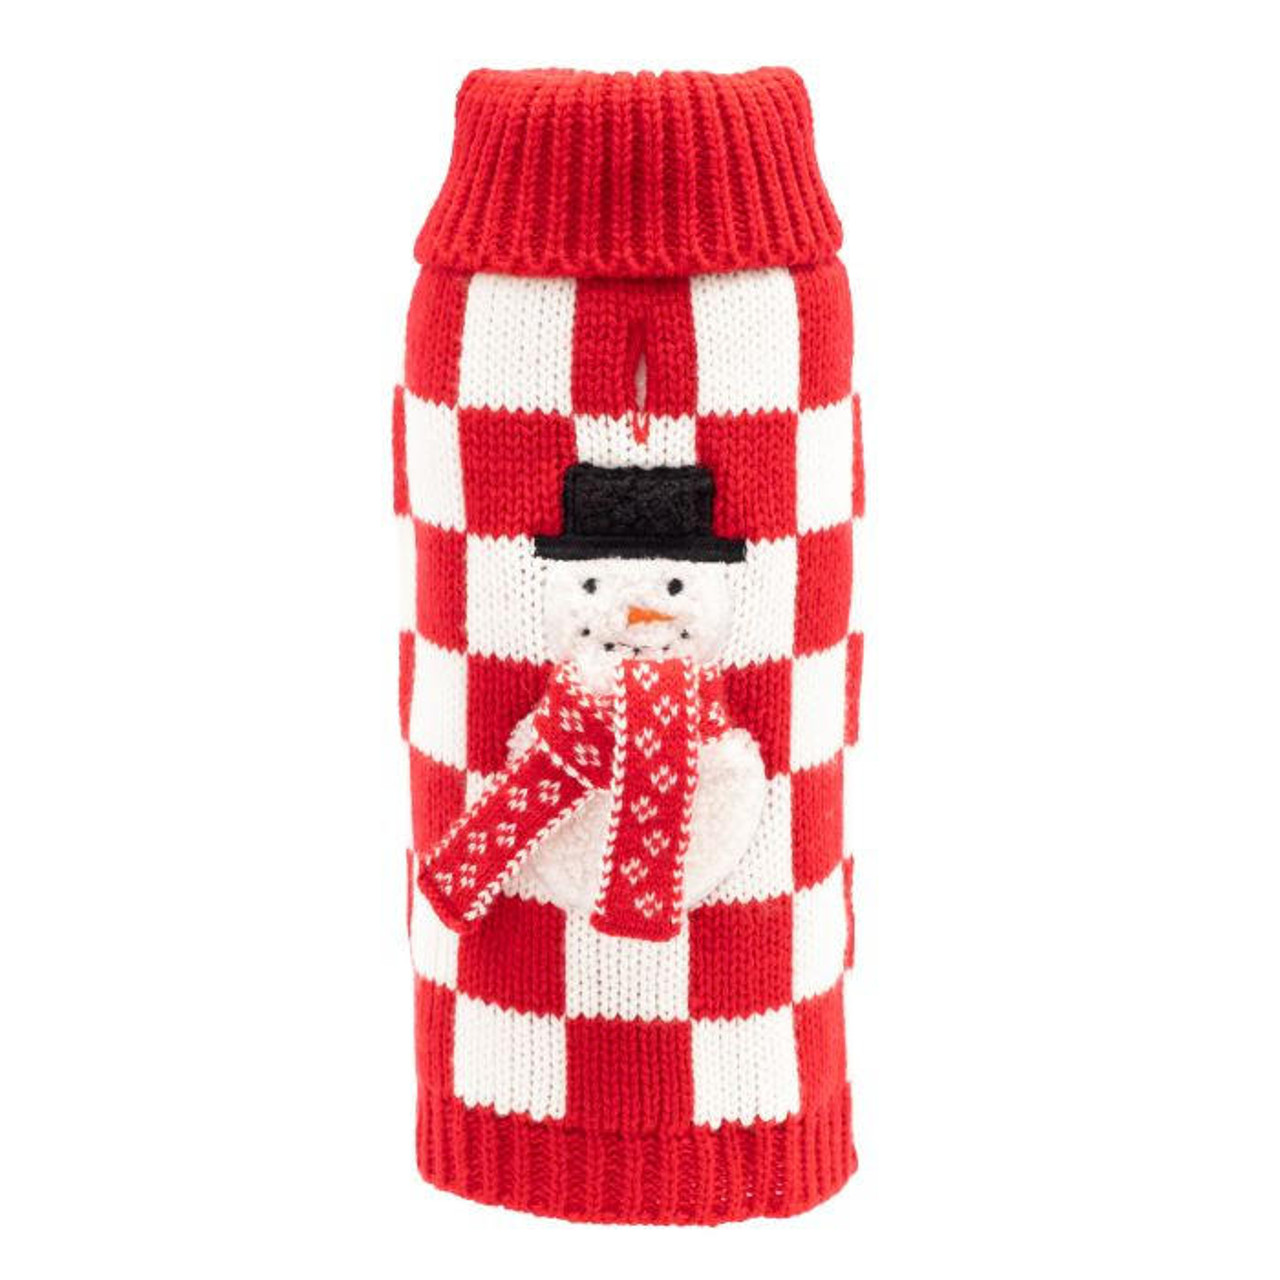 The Worthy Dog Checkerboard Snowman Sweater 